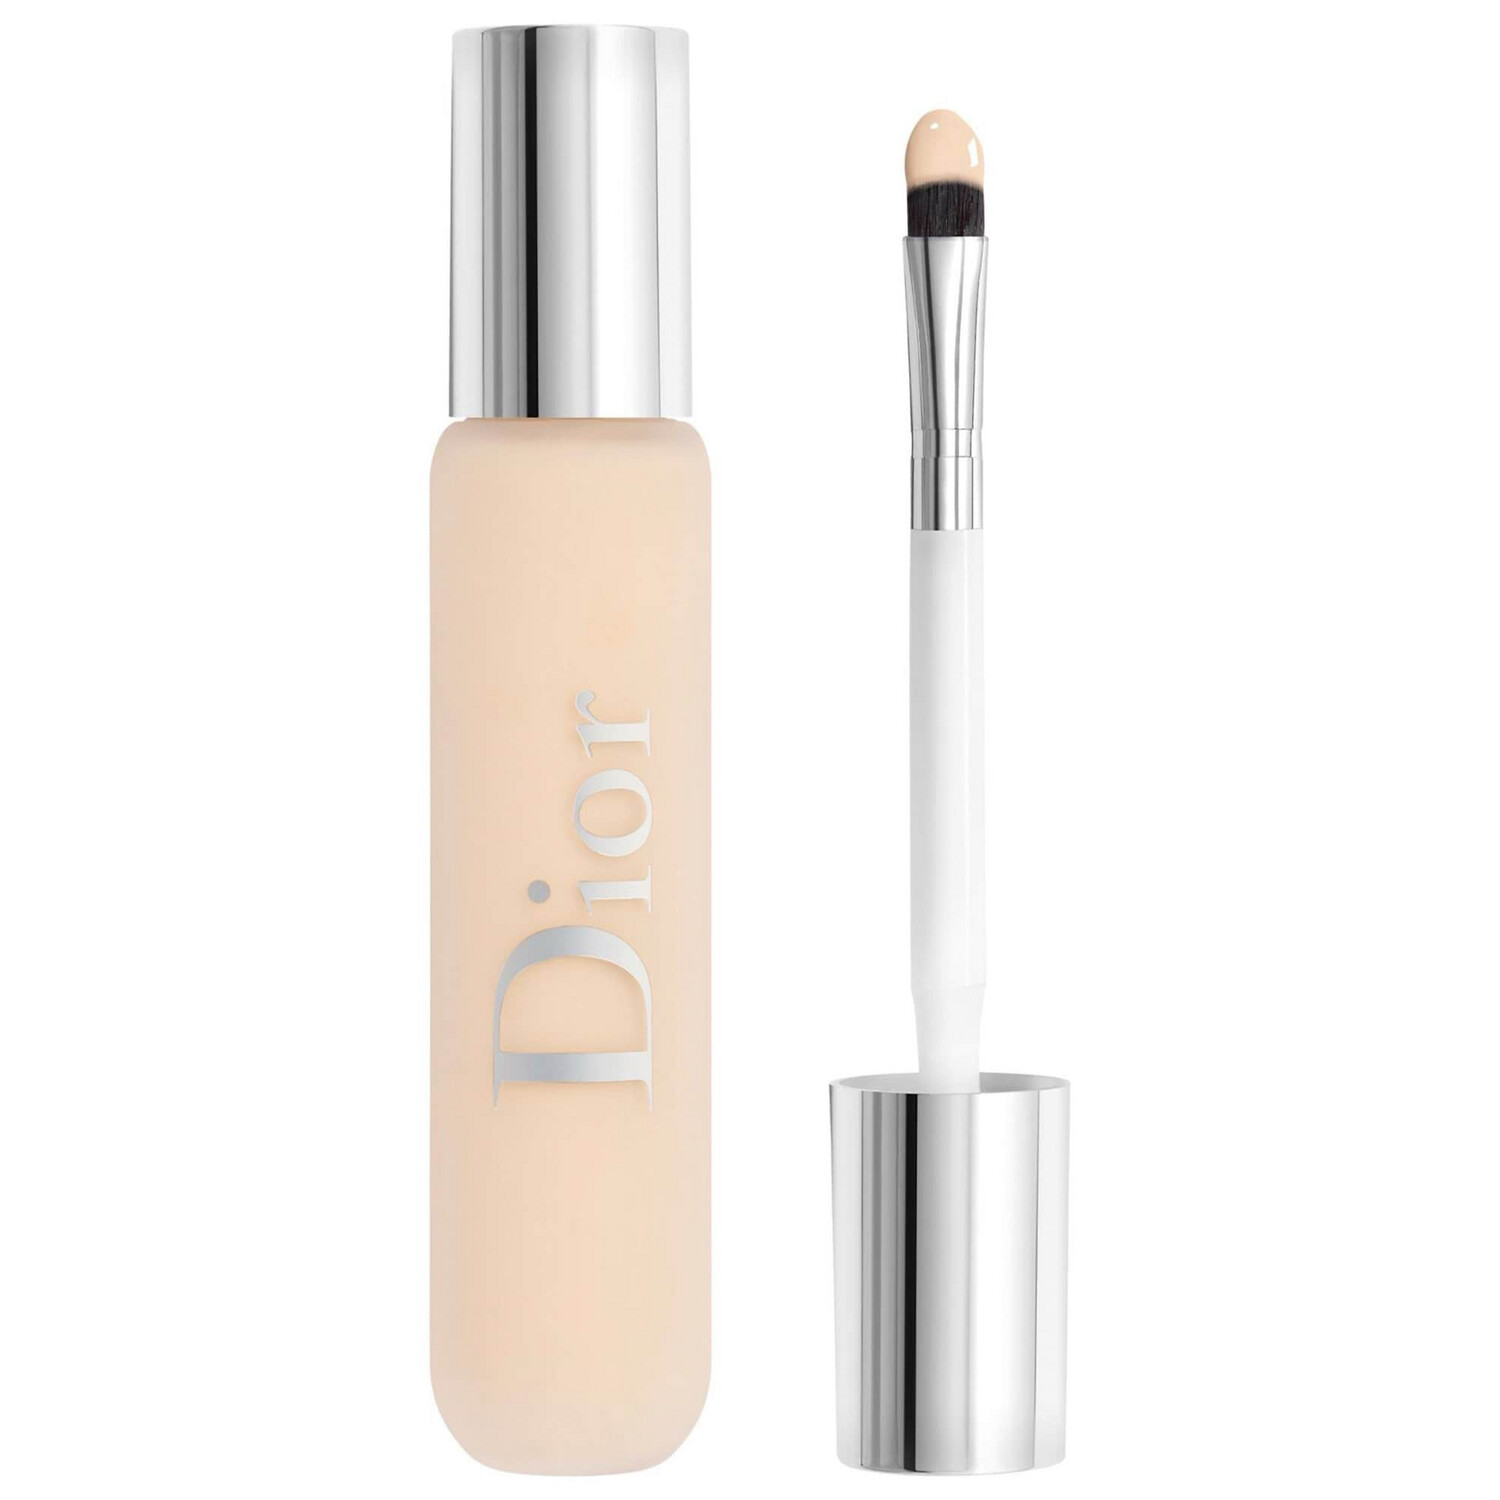 Dior - Backstage Flash Perfector Concealer | 1N - fair to light skin with neutral undertones